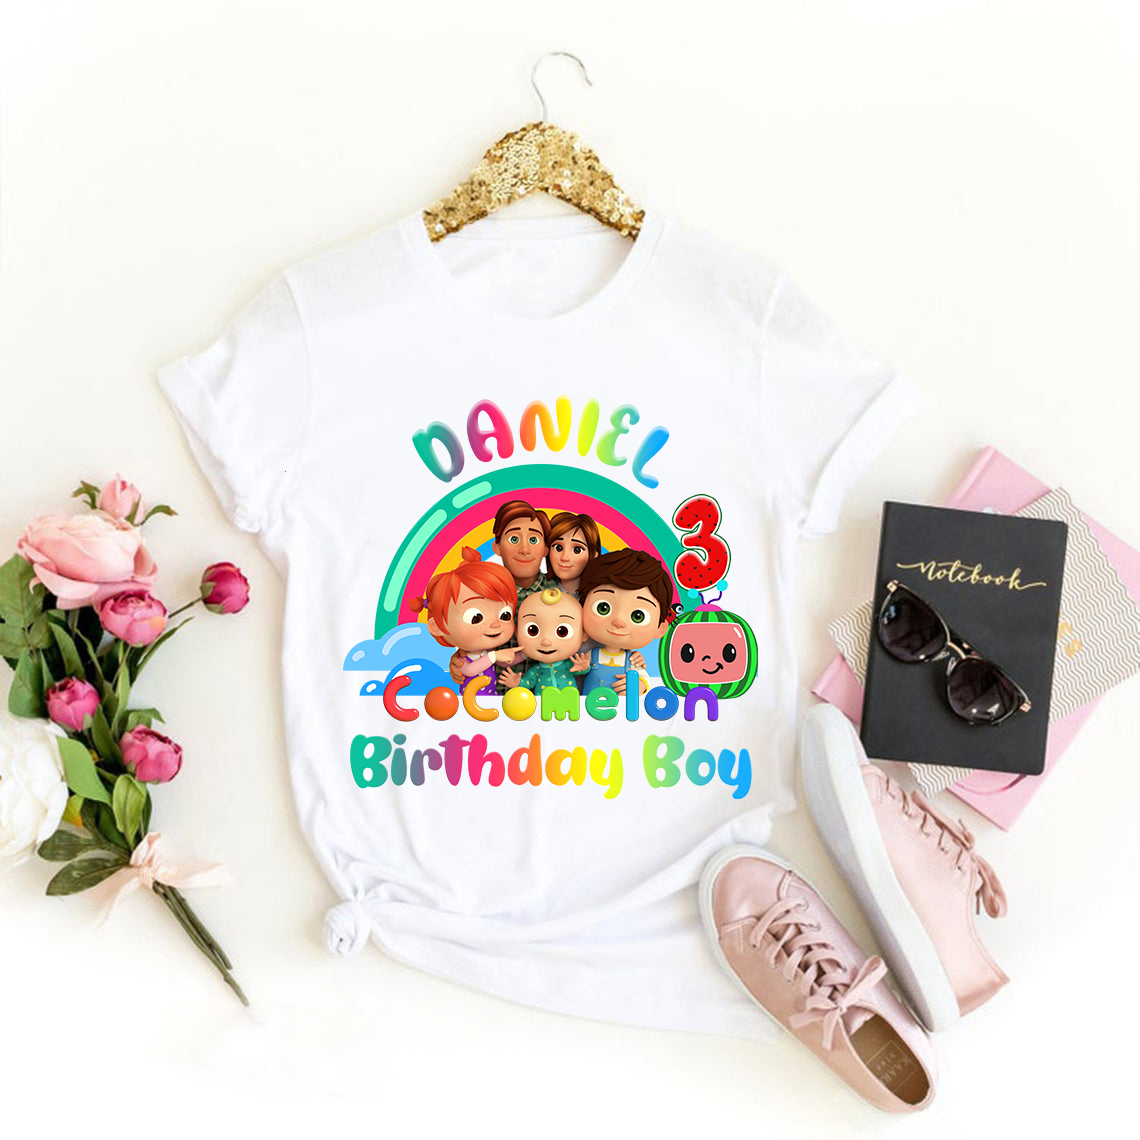 Personalized Cocomelon Birthday Shirt, Cocomelon Family Shirt, Cocomelon Birthday Gift For Kids, Cocomelon Theme Party